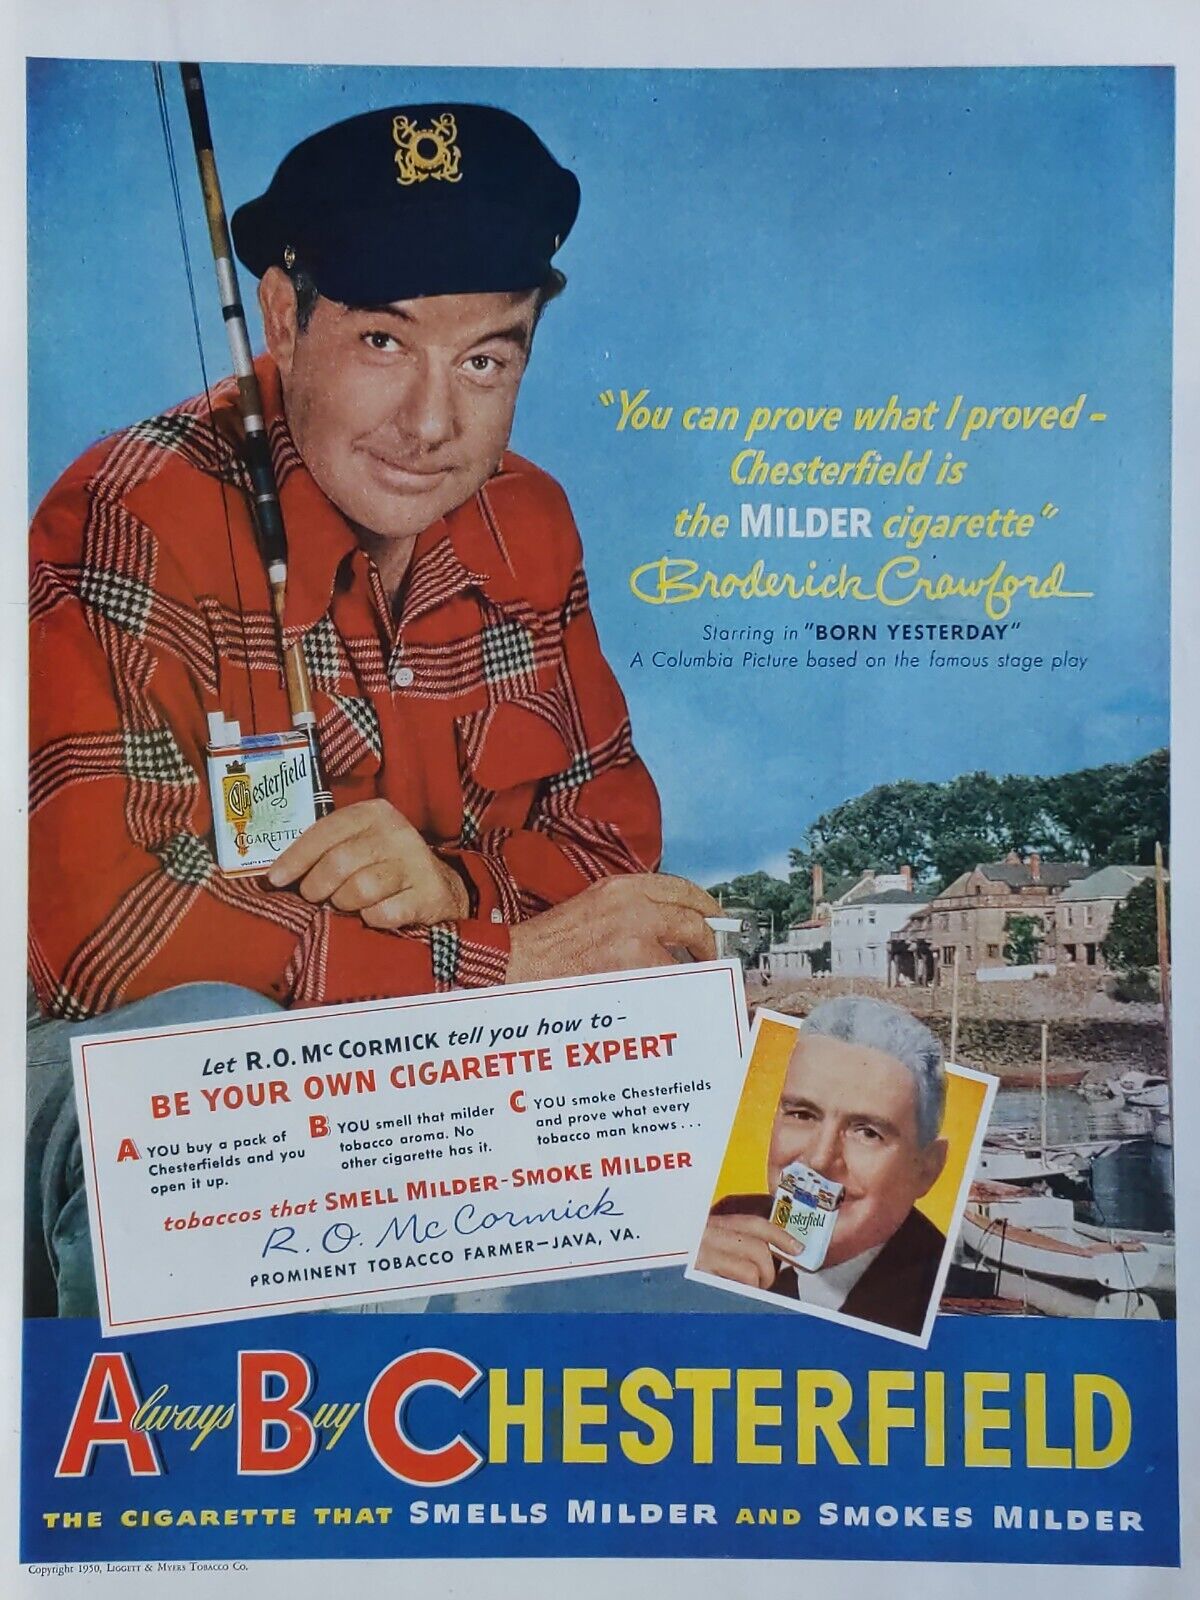  1950s vintage Chesterfield print ad. Featuring Broderick Crawford